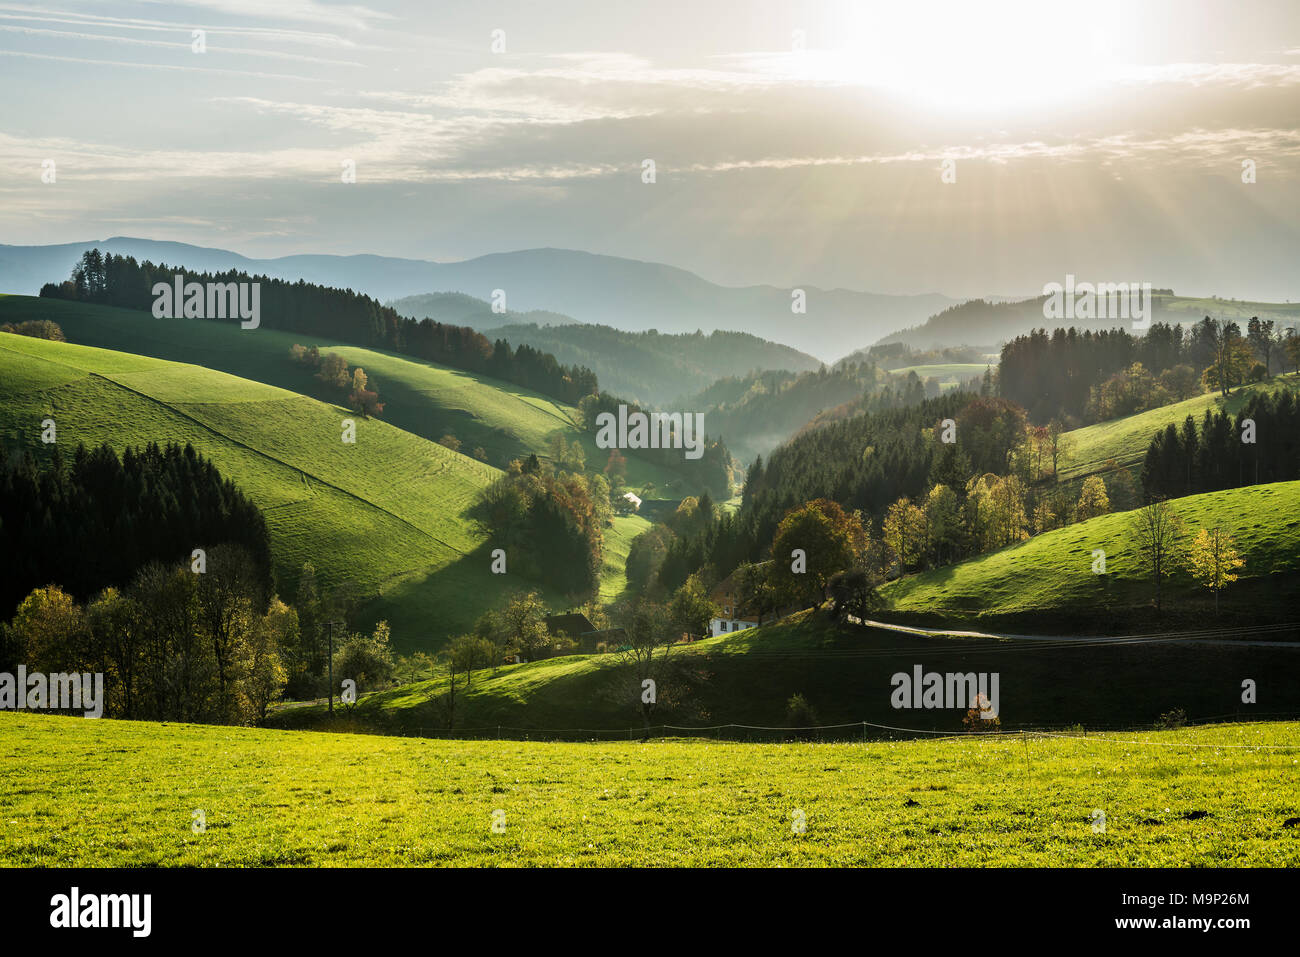 View of hilly landscape, teis forested, evening light, near St Märgen, Black Forest, Baden-Württemberg, Germany Stock Photo